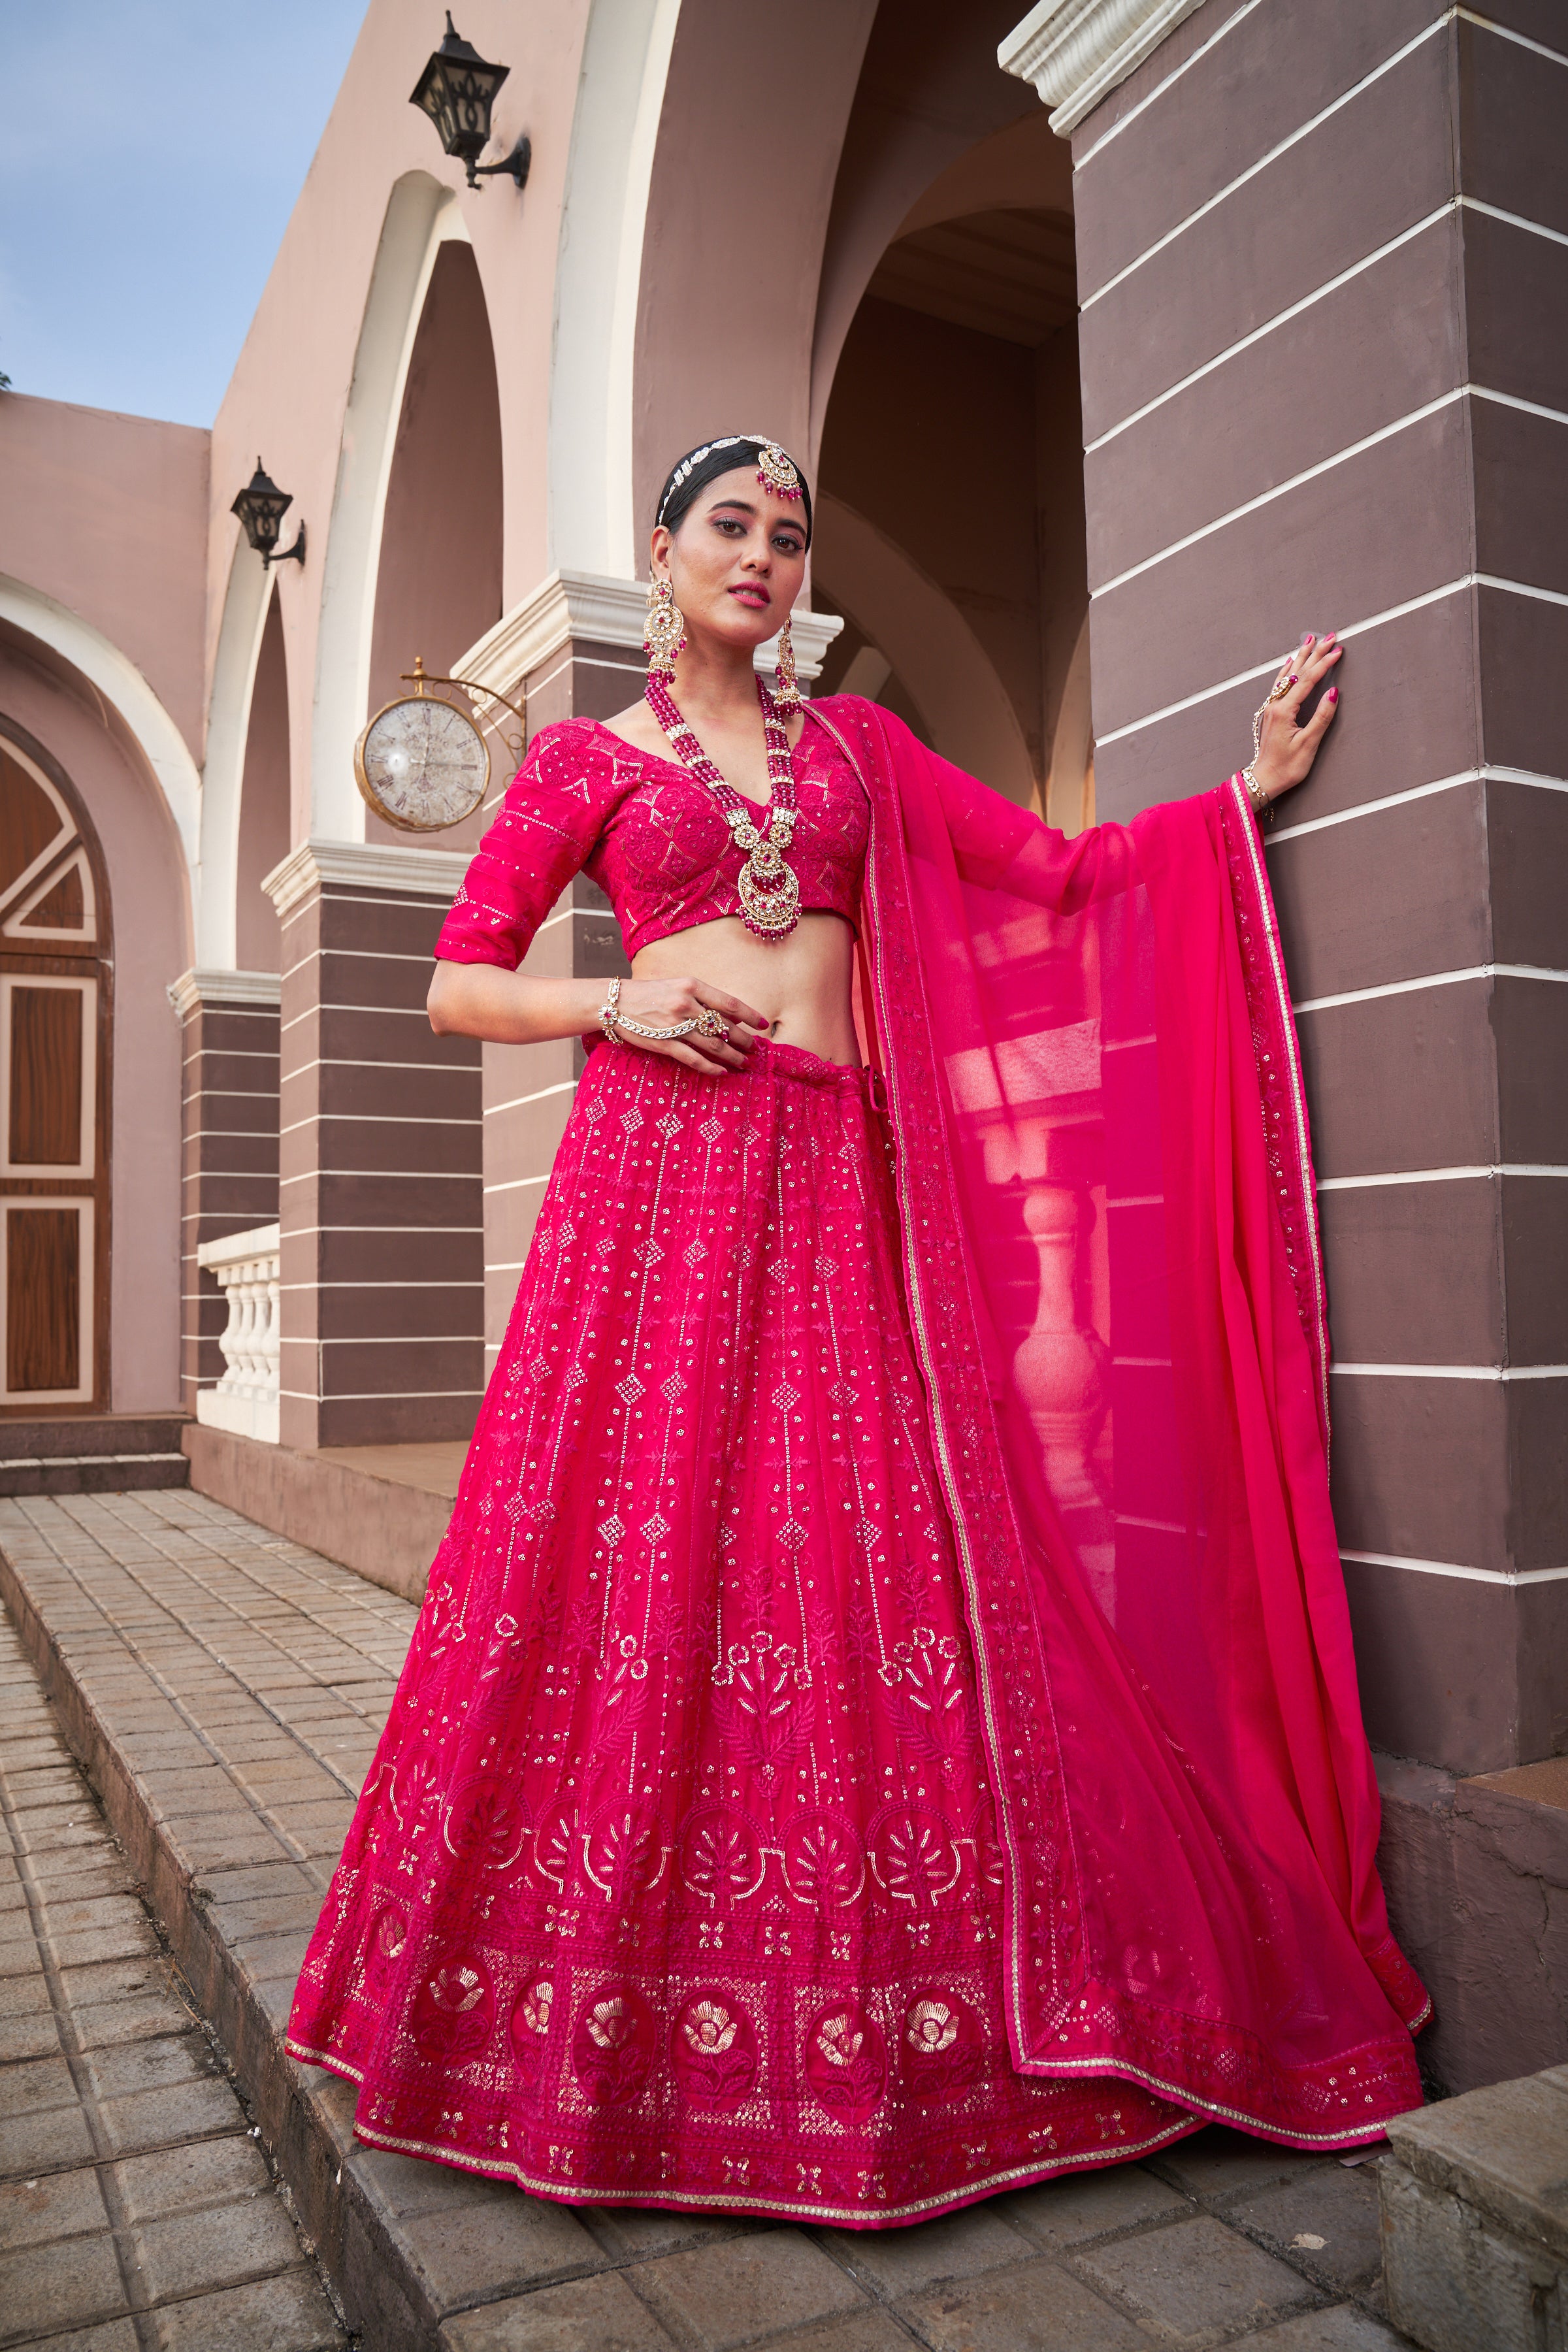 Photo of Bride and groom in fuschia pink coordinated outfits | Indian  wedding outfits, Indian bridal outfits, Groom outfit